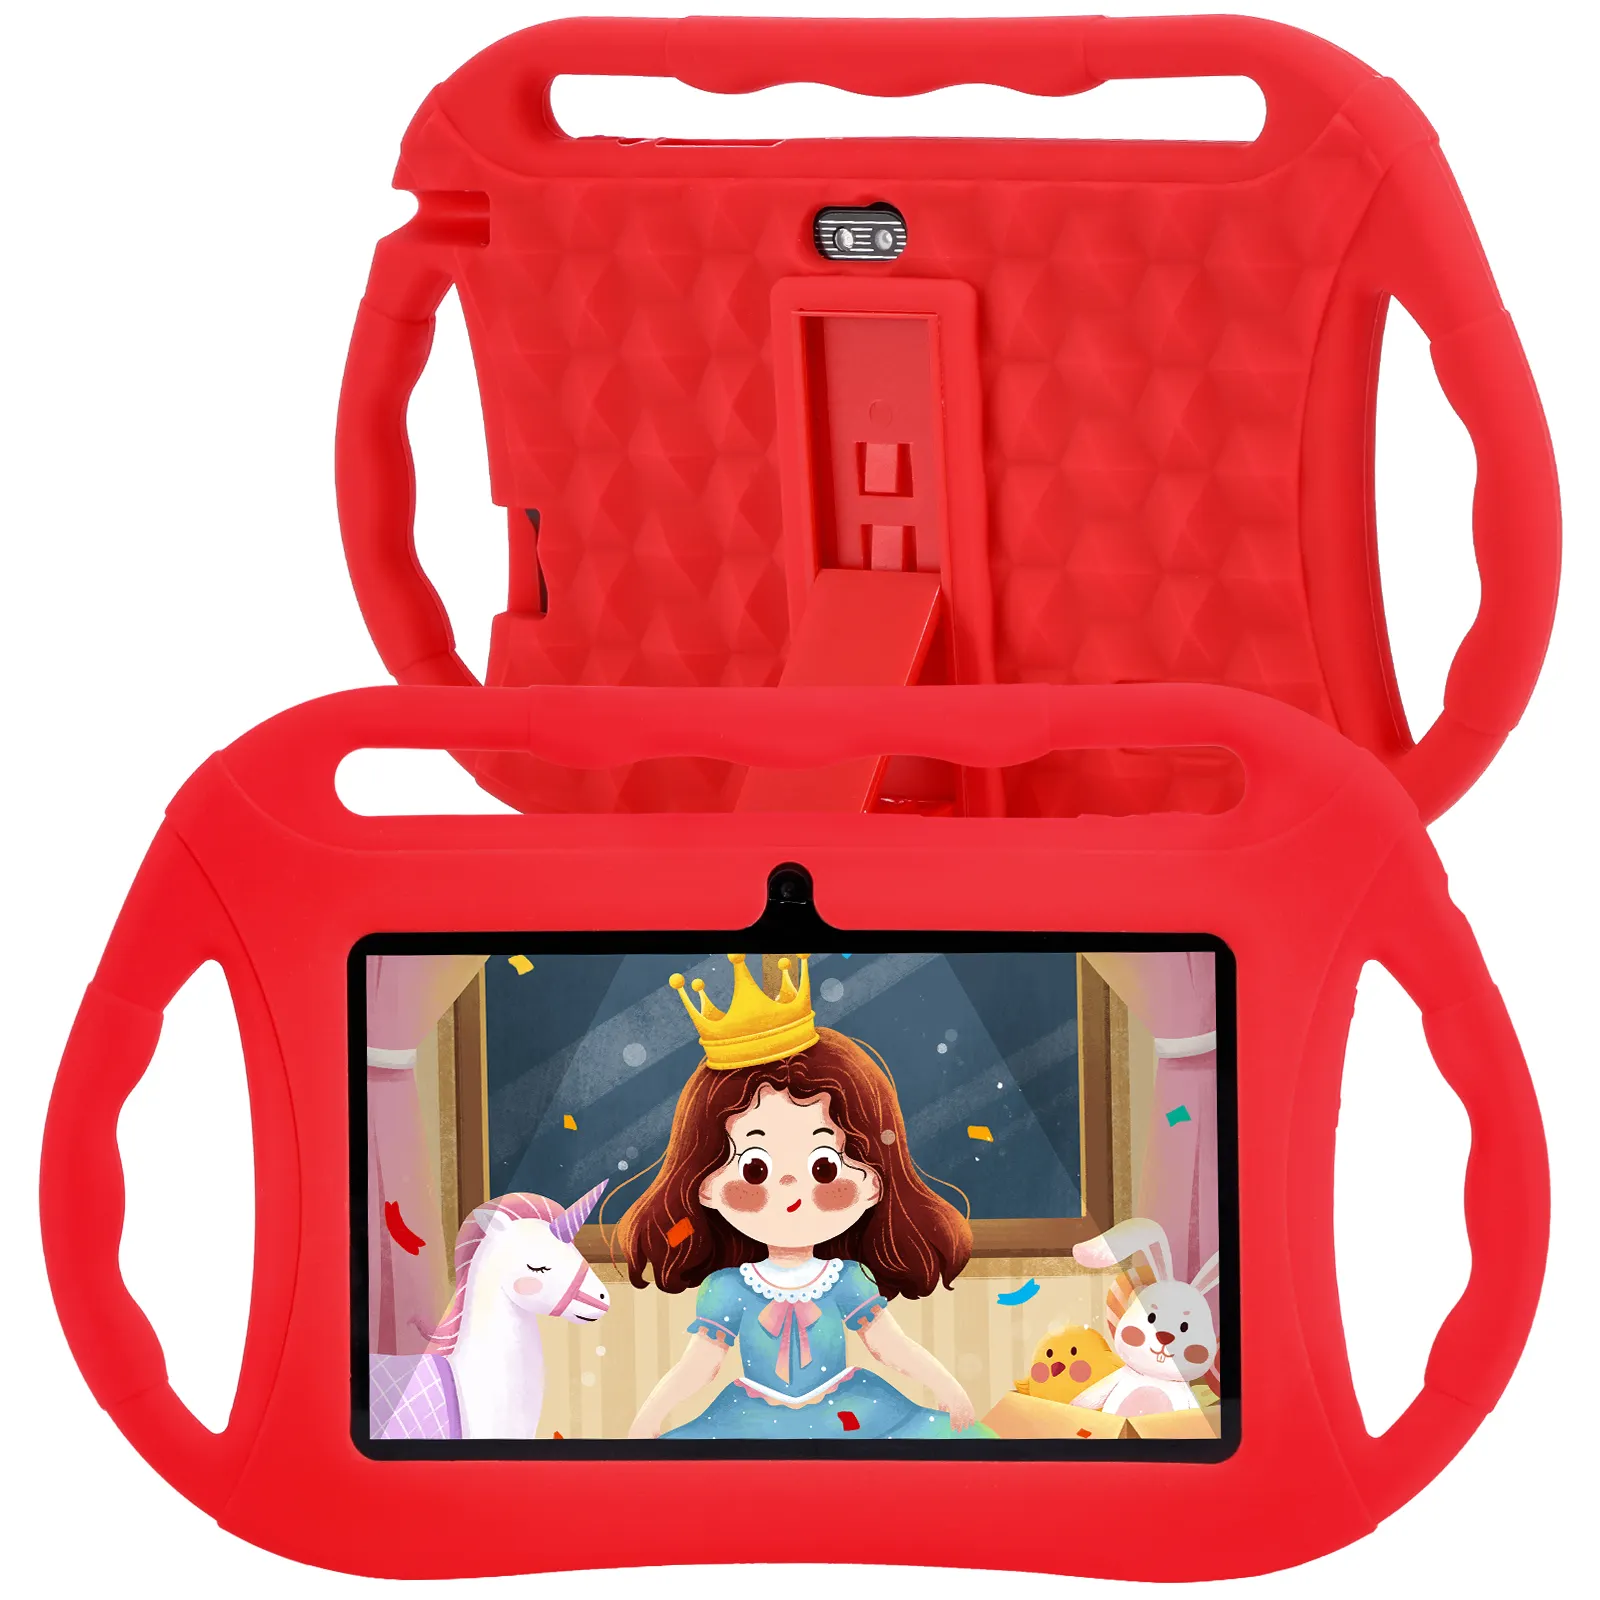 Veidoo Android Toddler Tablet for Kids 7 inch 32GB WiFi Dual Camera Kids Content Parental Control Tablet Pc with Kid-Proof Case